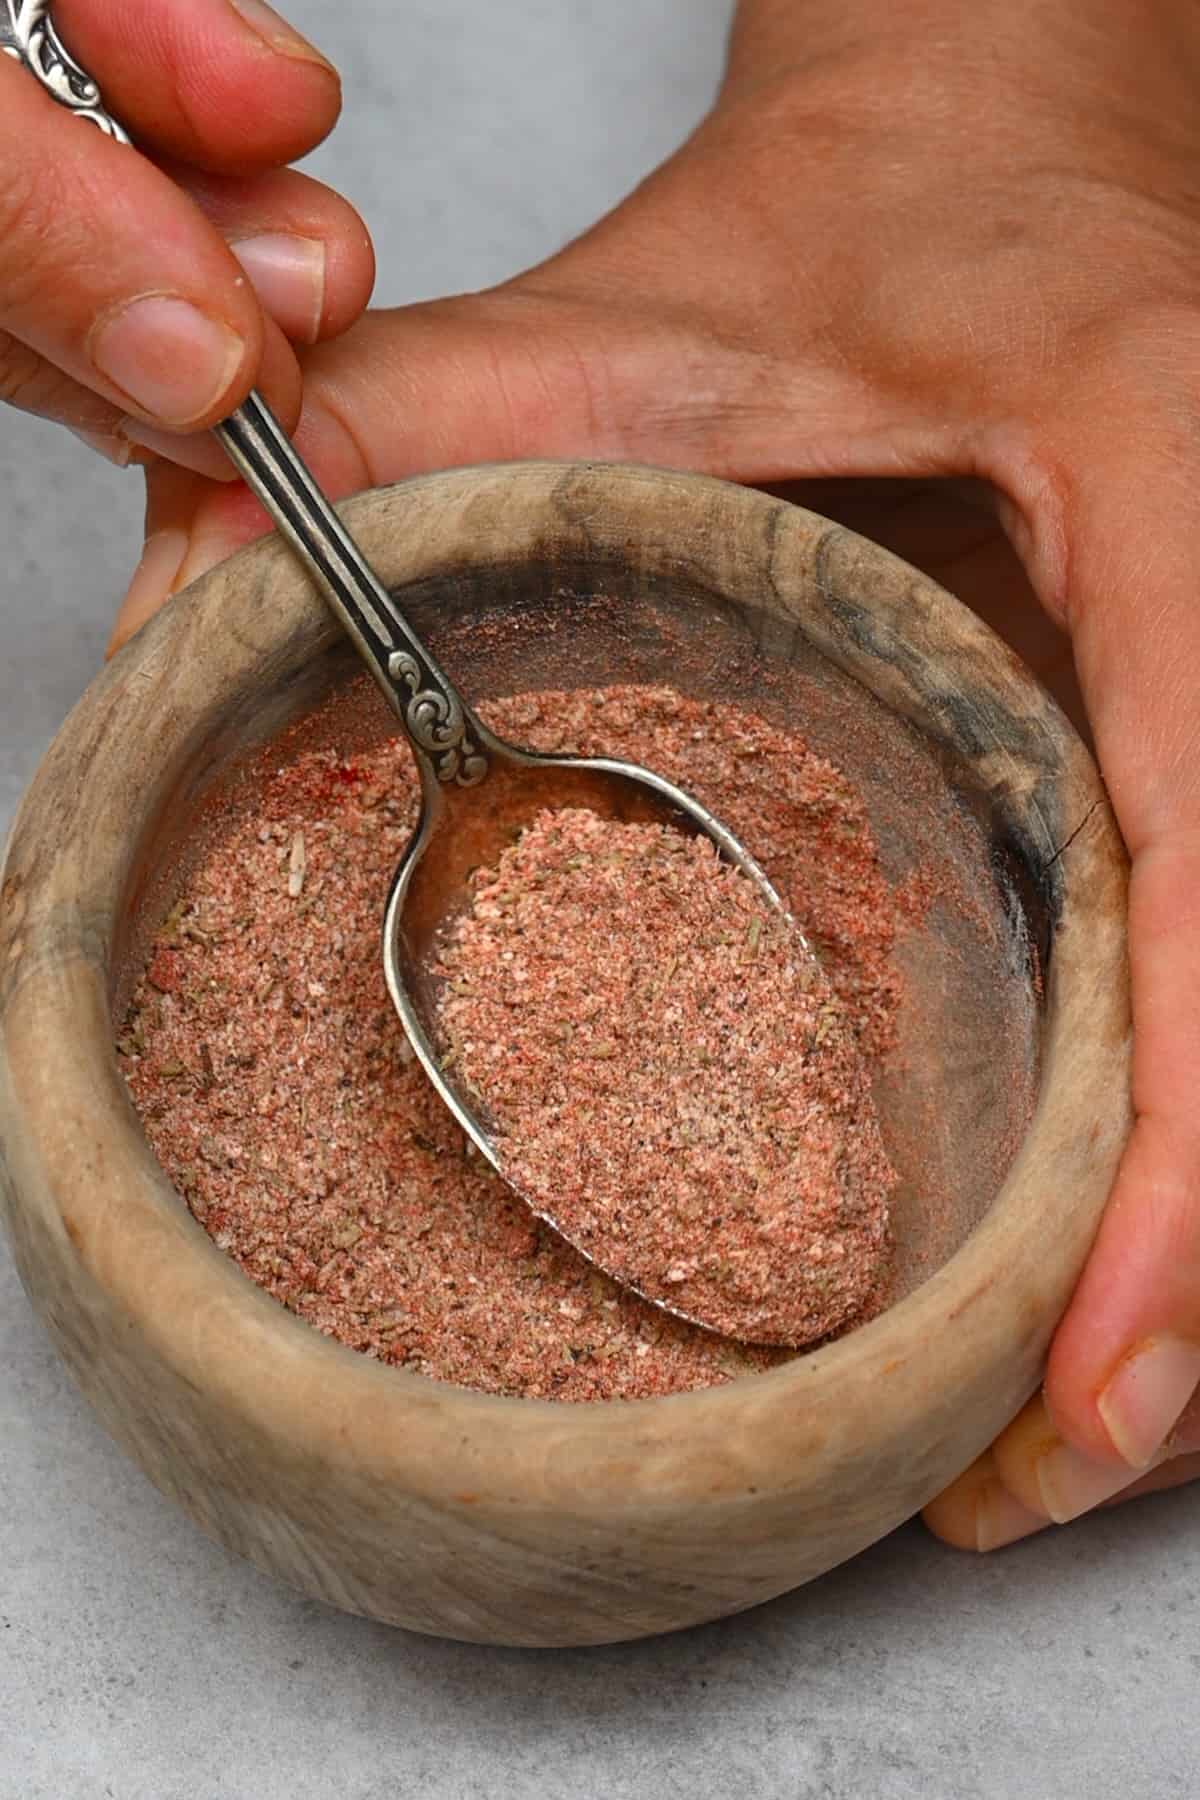 12 Little Seasoning Tricks To Take Your Cooking To The Next Level